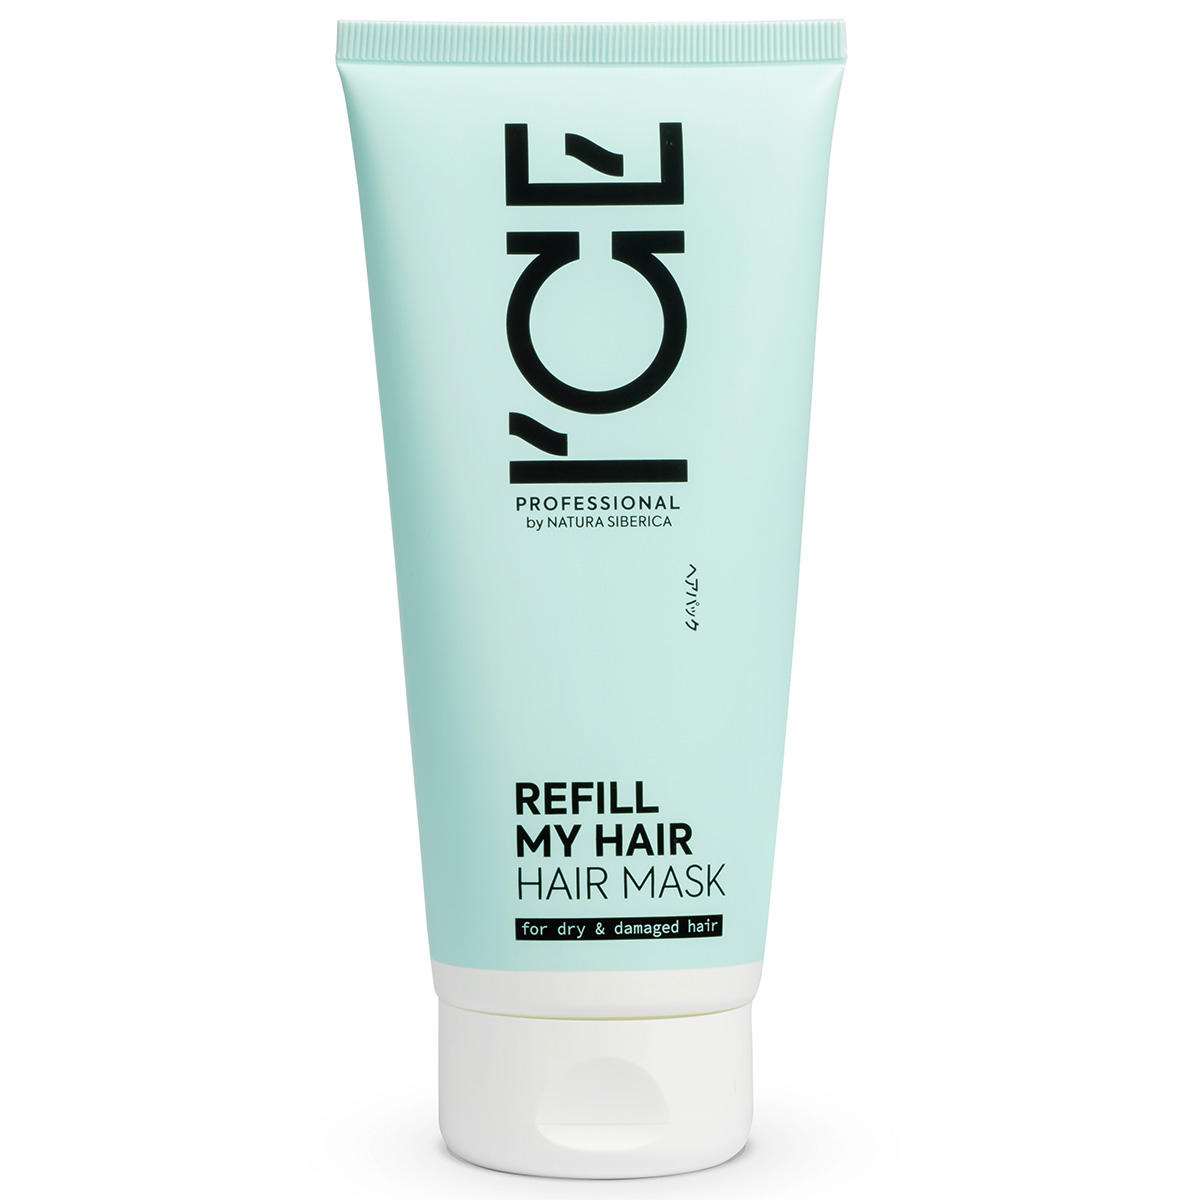 ICE Professional Refill My Hair Mask 200 ml - 1